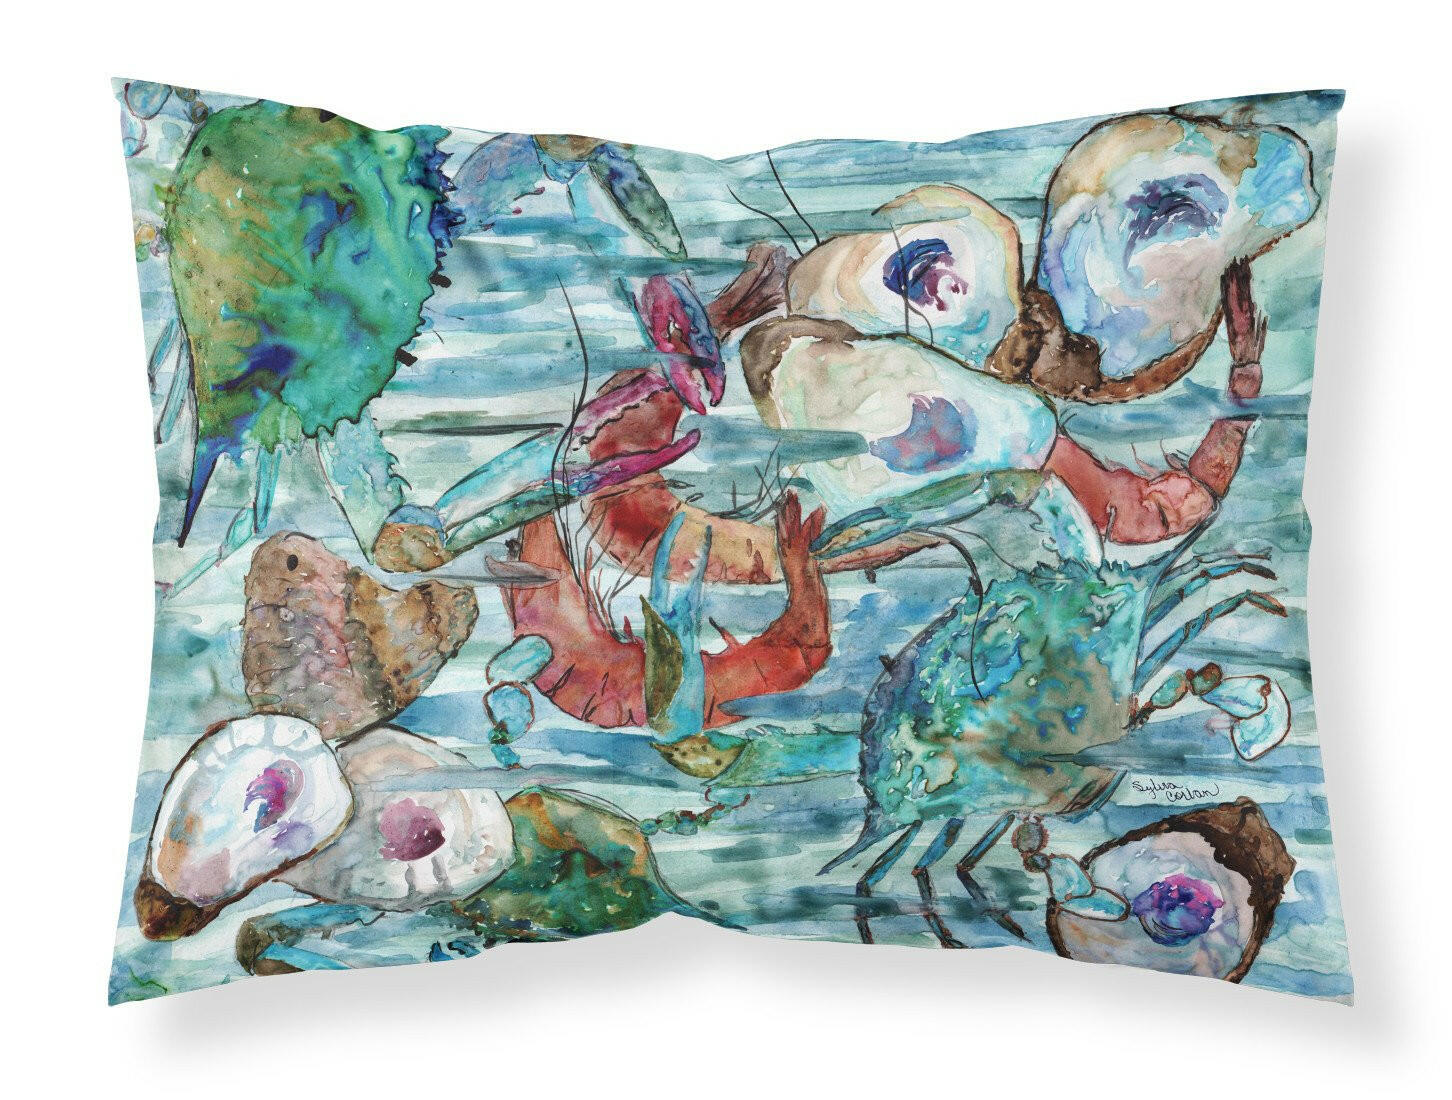 Watery Shrimp, Crabs and Oysters Fabric Standard Pillowcase 8964PILLOWCASE by Caroline's Treasures